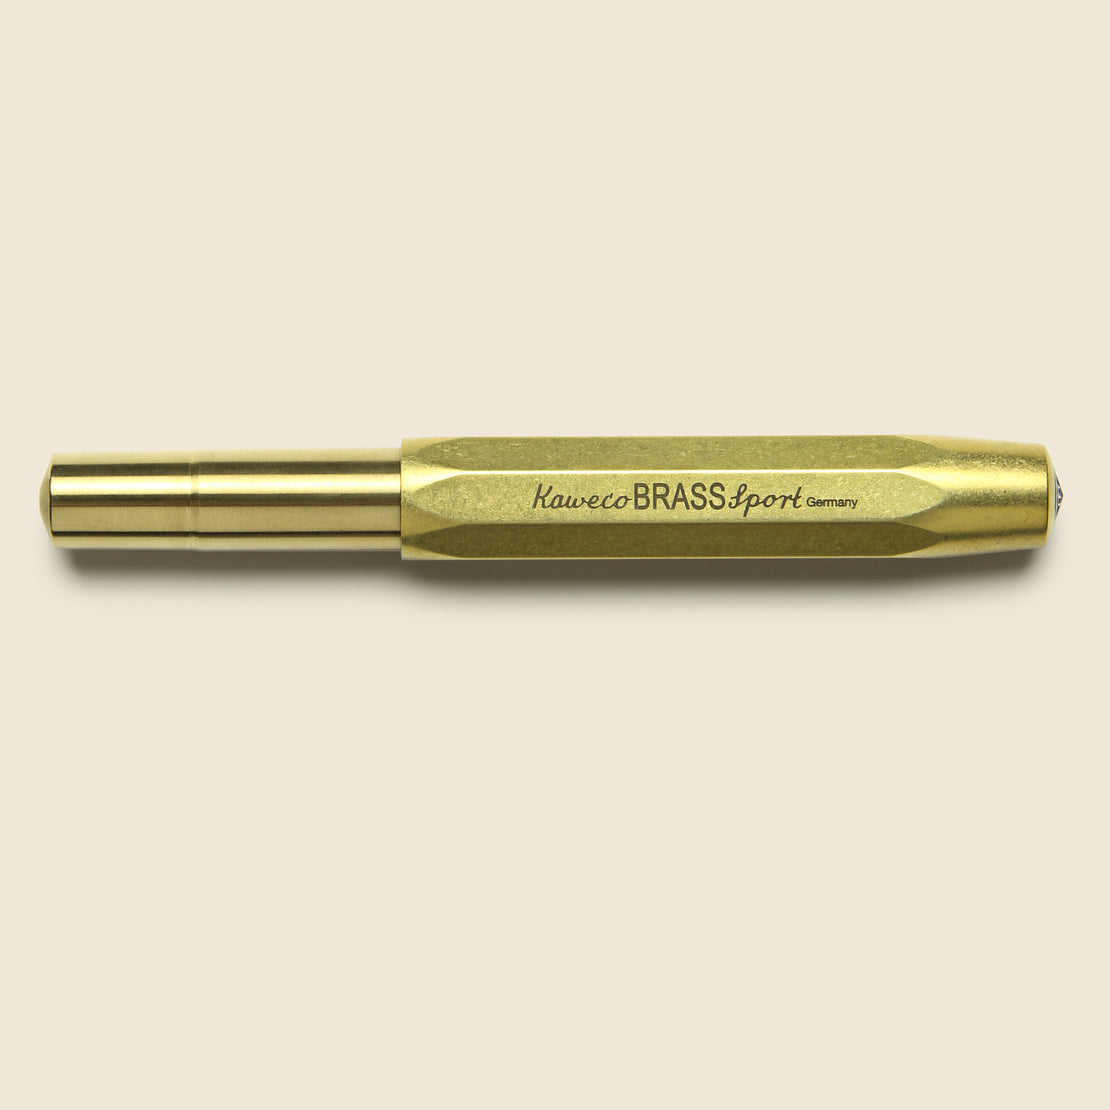 Brass Classic Sport Gel Roller Pen - Kaweco - STAG Provisions - Home - Office - Paper Goods